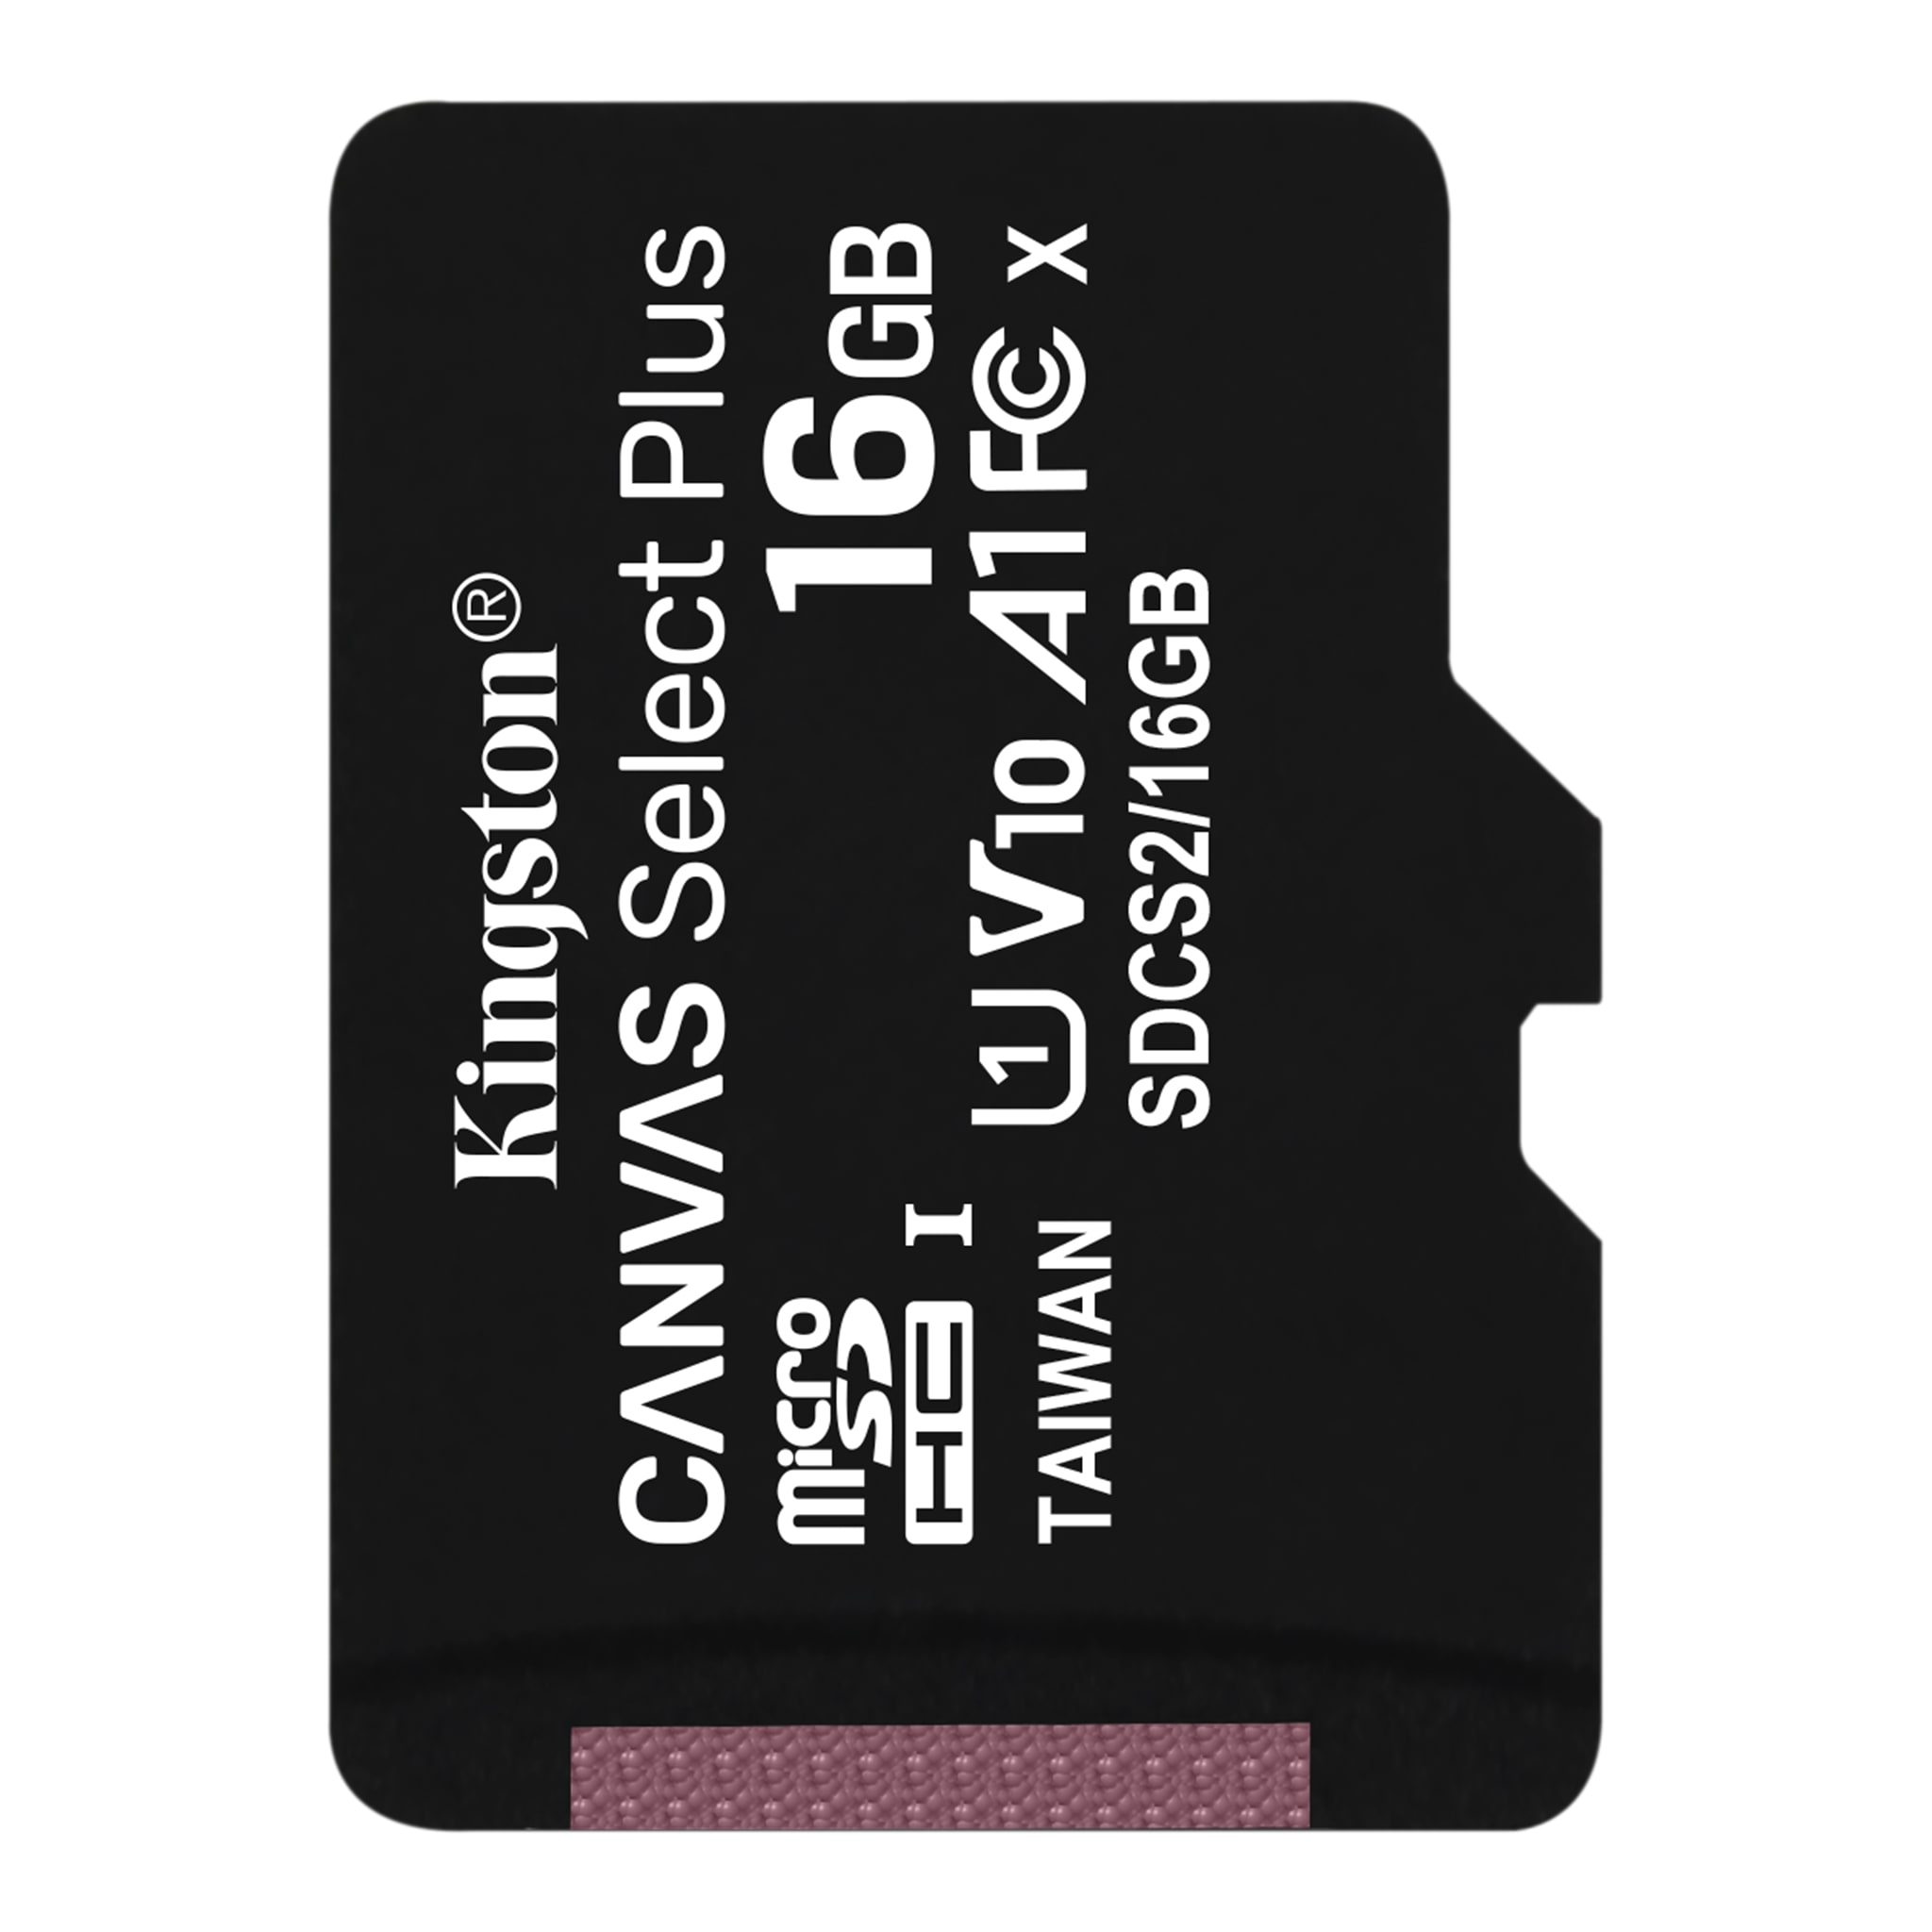 100MBs Works with Kingston Kingston 64GB Verykool s735 MicroSDXC Canvas Select Plus Card Verified by SanFlash.